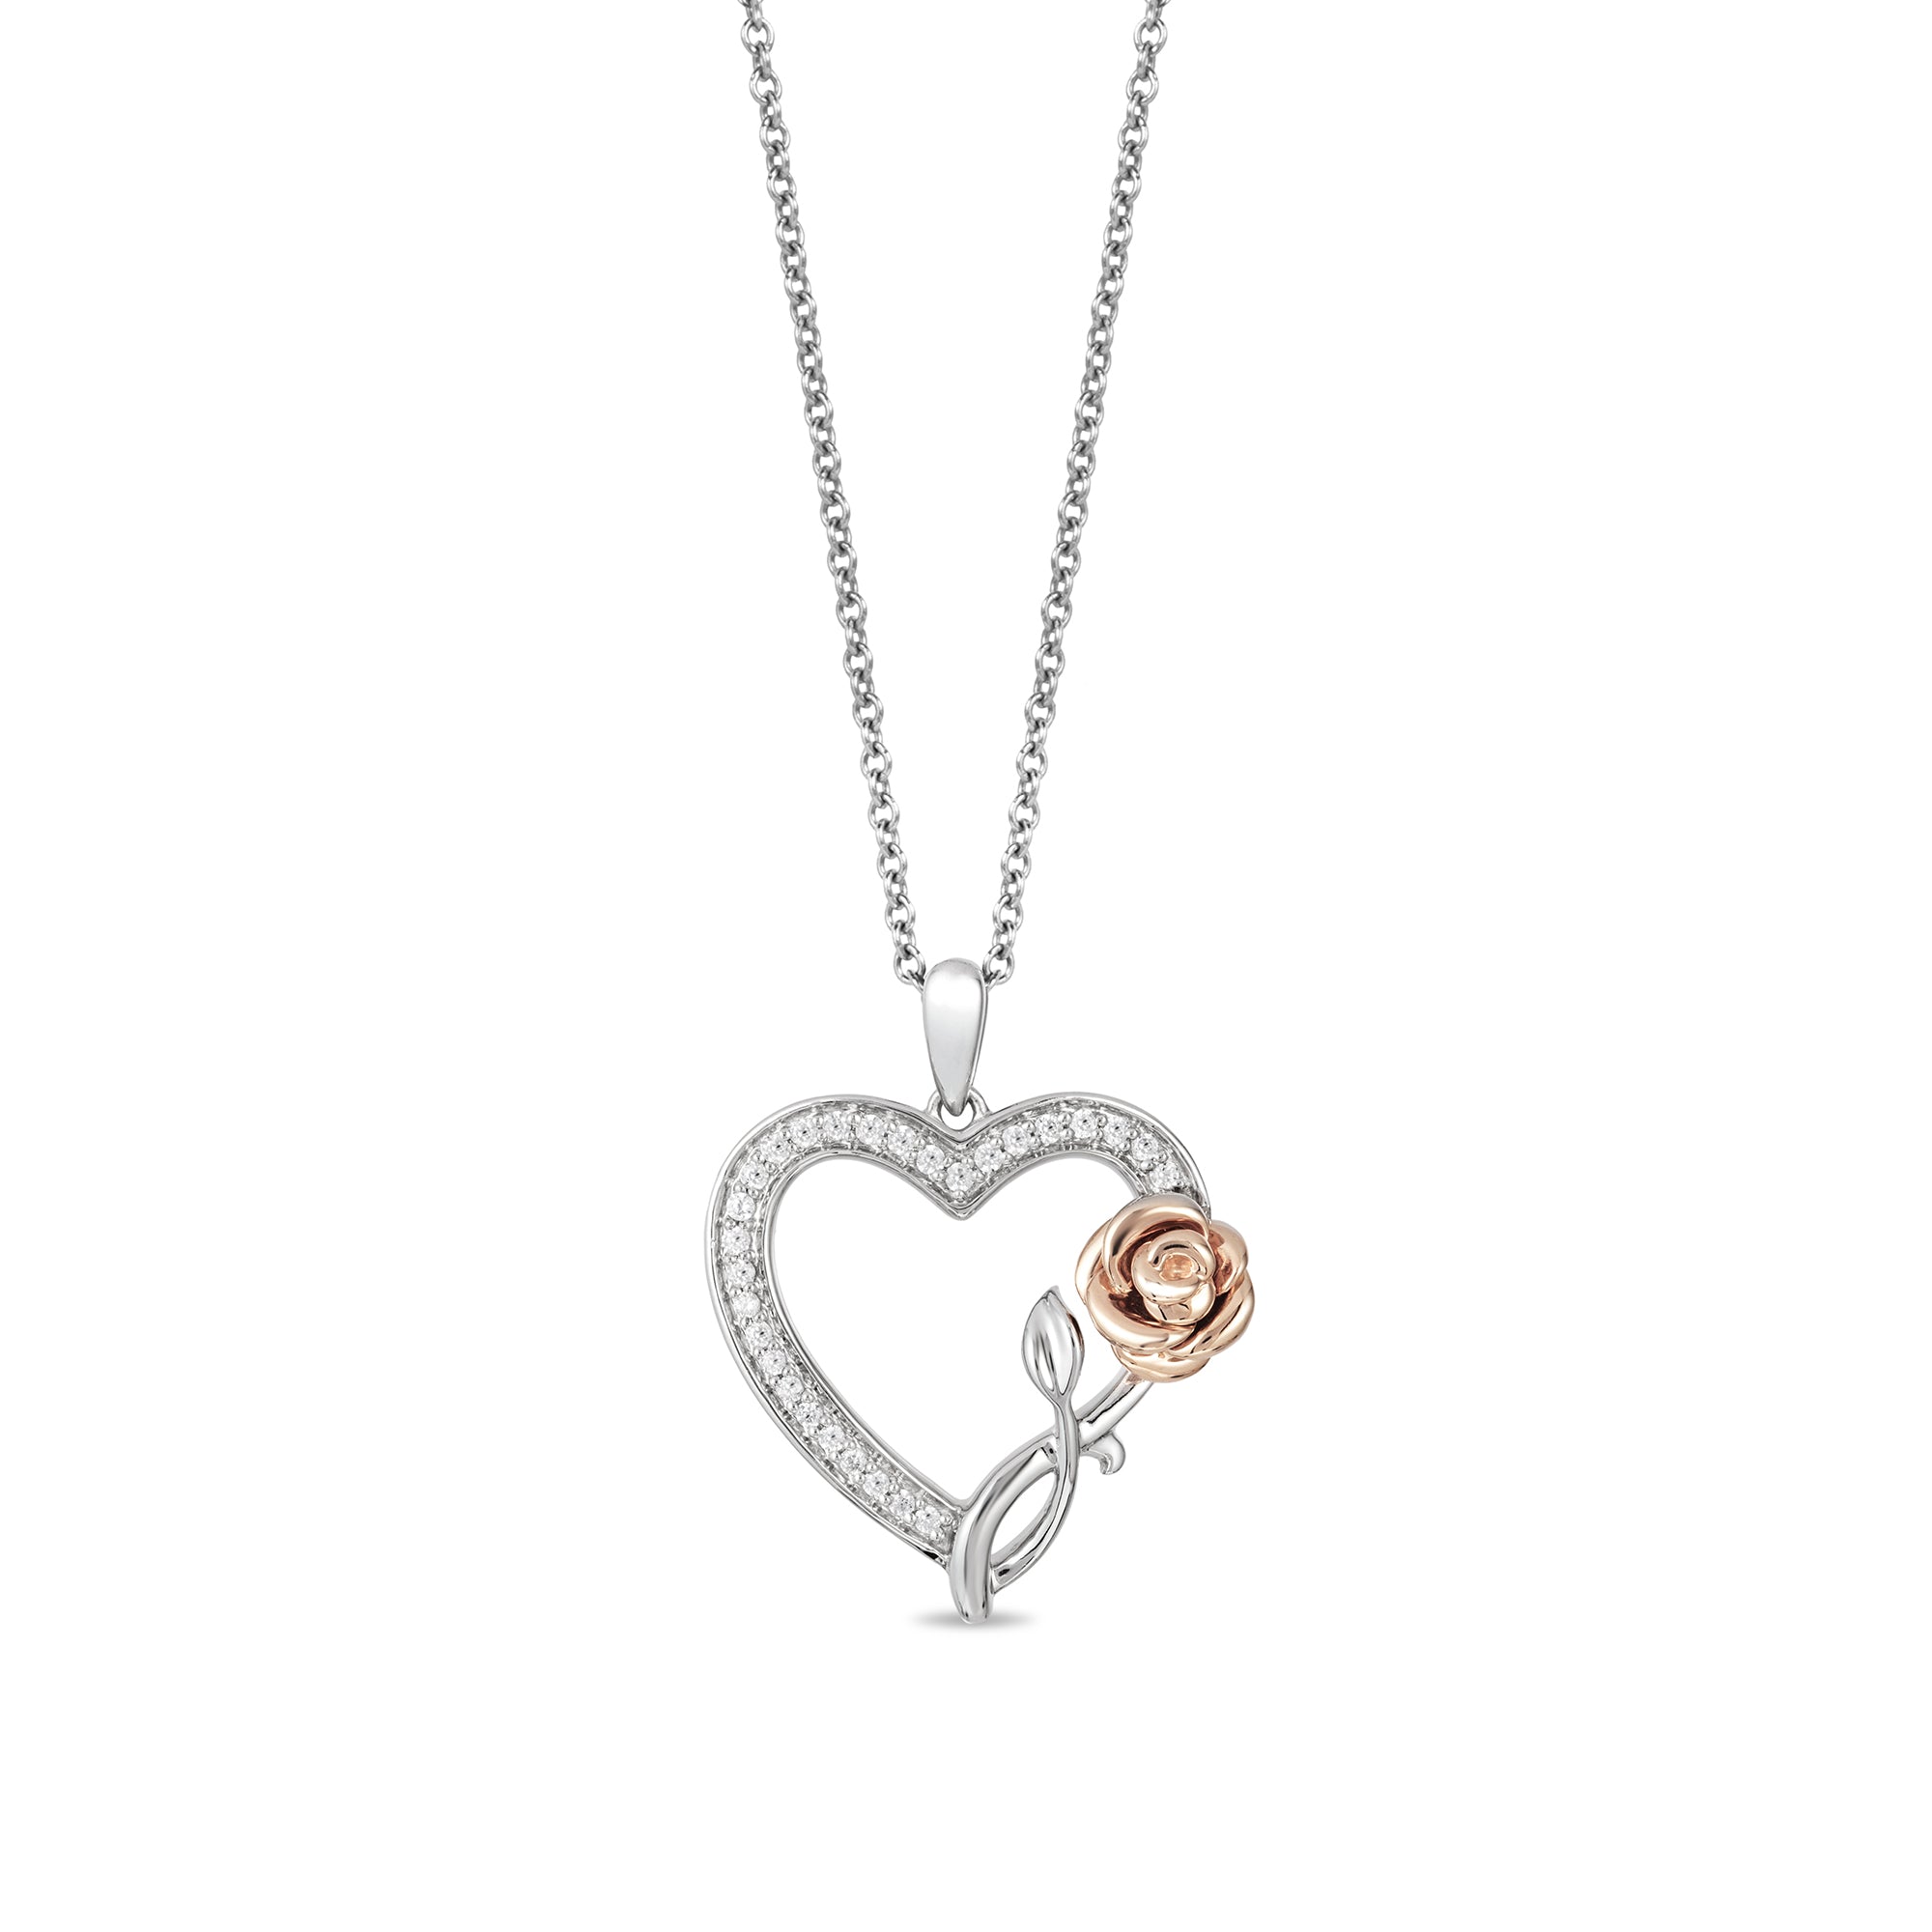 Love Necklace with a Sparkling Star of David - Silver, Gold or Rose Go